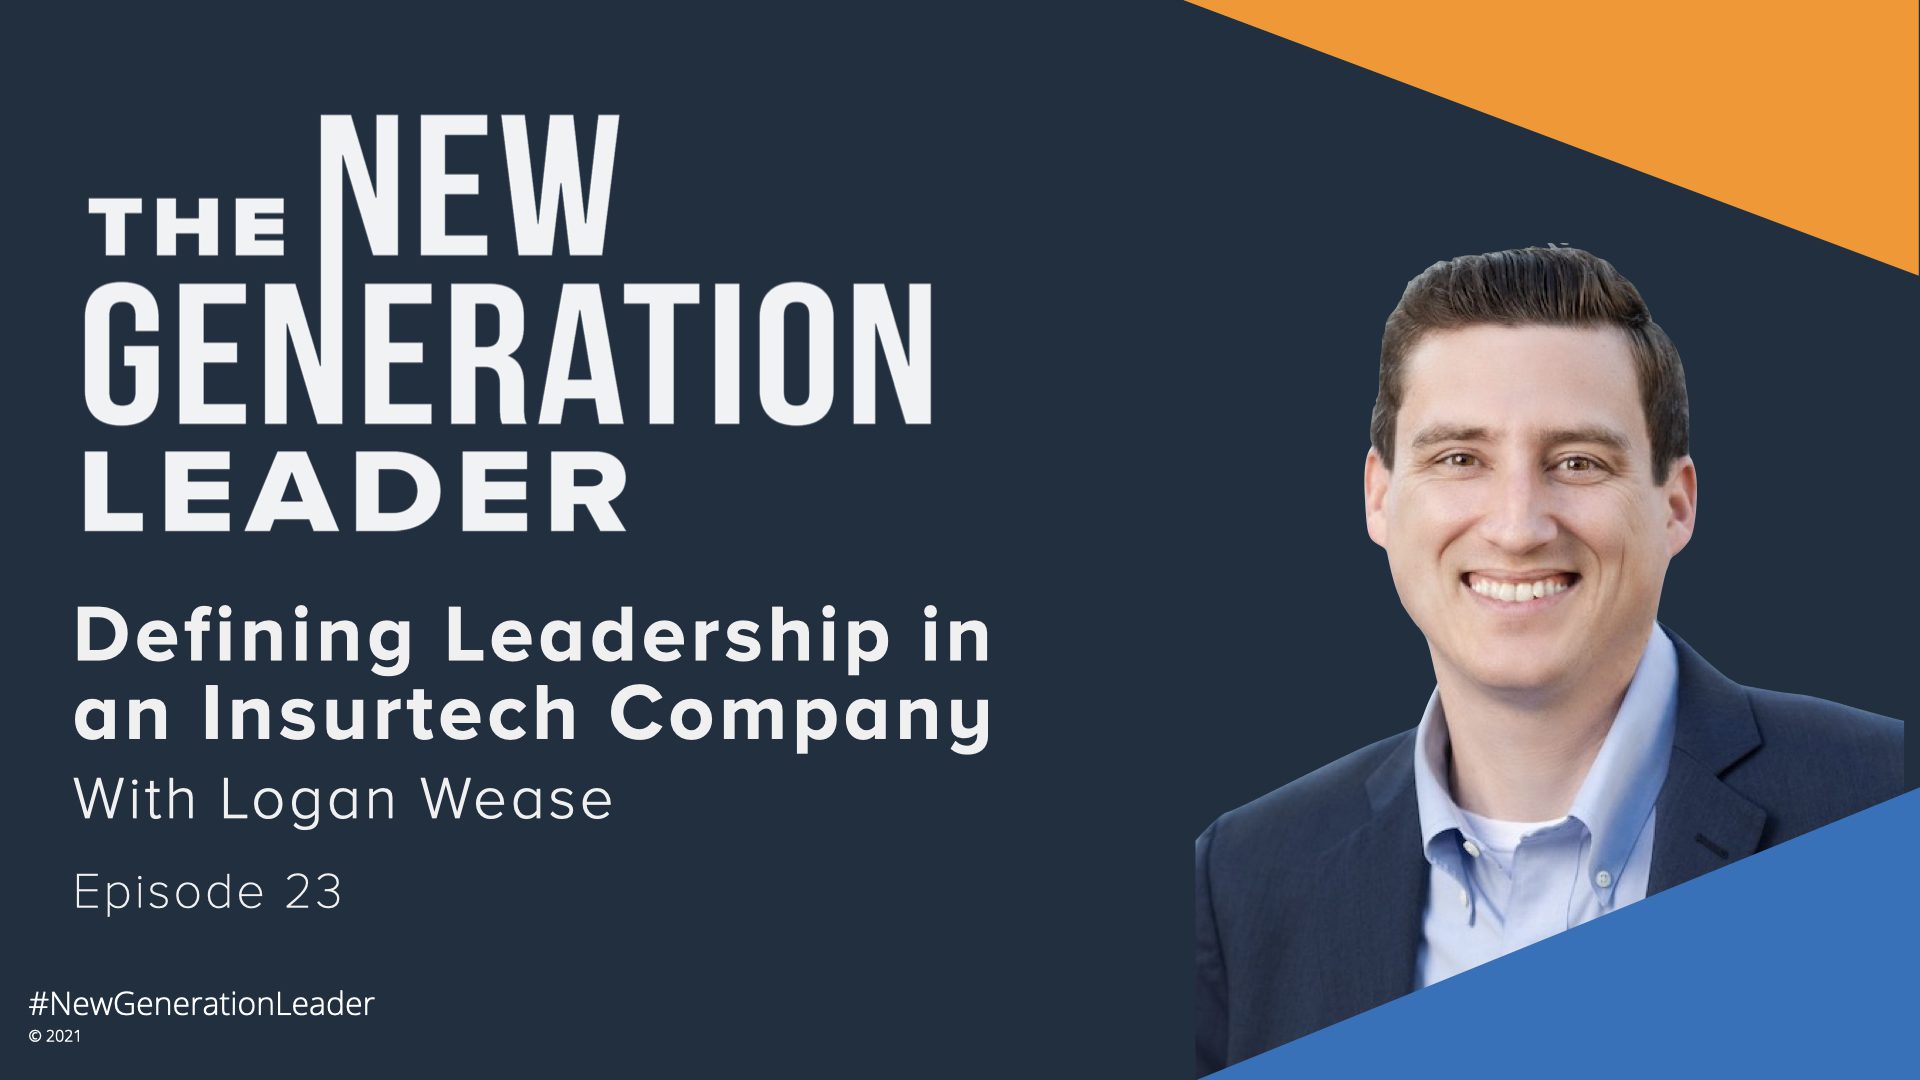 Defining Leadership in an Insurtech Company with Logan Wease